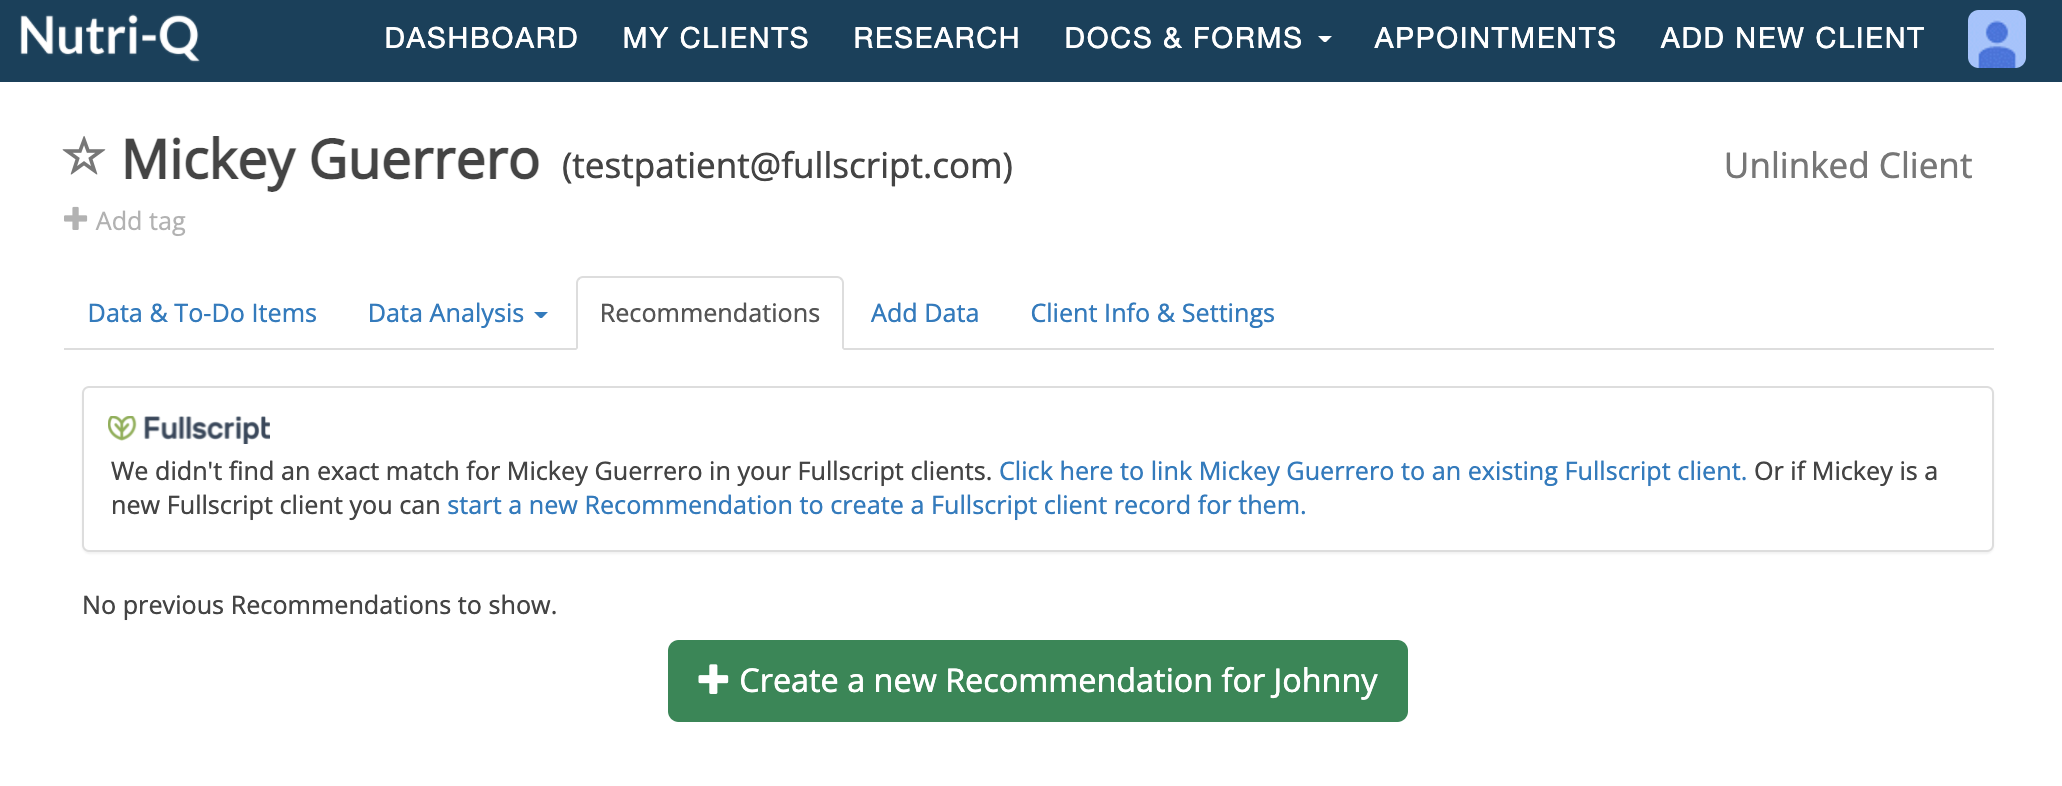 manually link patient or redirect to fullscript